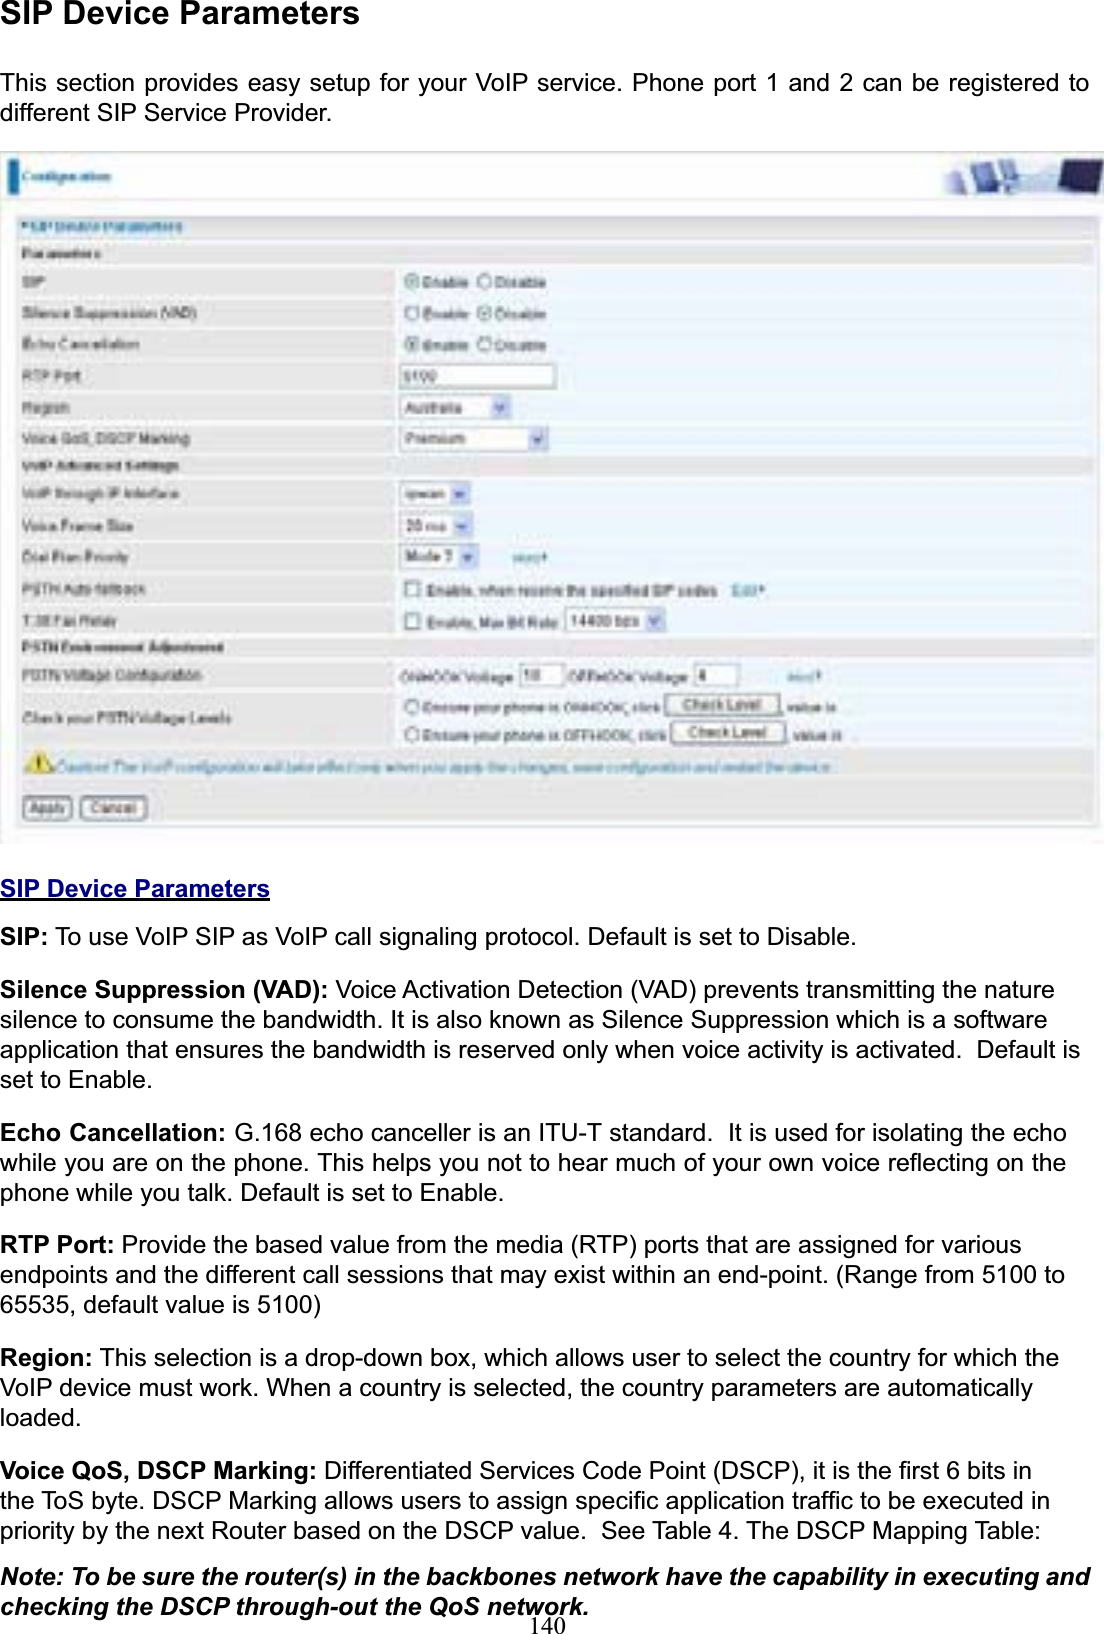 140SIP Device ParametersThis section provides easy setup for your VoIP service. Phone port 1 and 2 can be registered to different SIP Service Provider. SIP Device ParametersSIP: To use VoIP SIP as VoIP call signaling protocol. Default is set to Disable. Silence Suppression (VAD): Voice Activation Detection (VAD) prevents transmitting the nature silence to consume the bandwidth. It is also known as Silence Suppression which is a software application that ensures the bandwidth is reserved only when voice activity is activated.  Default is set to Enable. Echo Cancellation: G.168 echo canceller is an ITU-T standard.  It is used for isolating the echo while you are on the phone. This helps you not to hear much of your own voice reflecting on the phone while you talk. Default is set to Enable. RTP Port: Provide the based value from the media (RTP) ports that are assigned for various endpoints and the different call sessions that may exist within an end-point. (Range from 5100 to 65535, default value is 5100) Region: This selection is a drop-down box, which allows user to select the country for which the VoIP device must work. When a country is selected, the country parameters are automatically loaded.Voice QoS, DSCP Marking: Differentiated Services Code Point (DSCP), it is the first 6 bits in the ToS byte. DSCP Marking allows users to assign specific application traffic to be executed in priority by the next Router based on the DSCP value.  See Table 4. The DSCP Mapping Table: Note: To be sure the router(s) in the backbones network have the capability in executing and checking the DSCP through-out the QoS network.